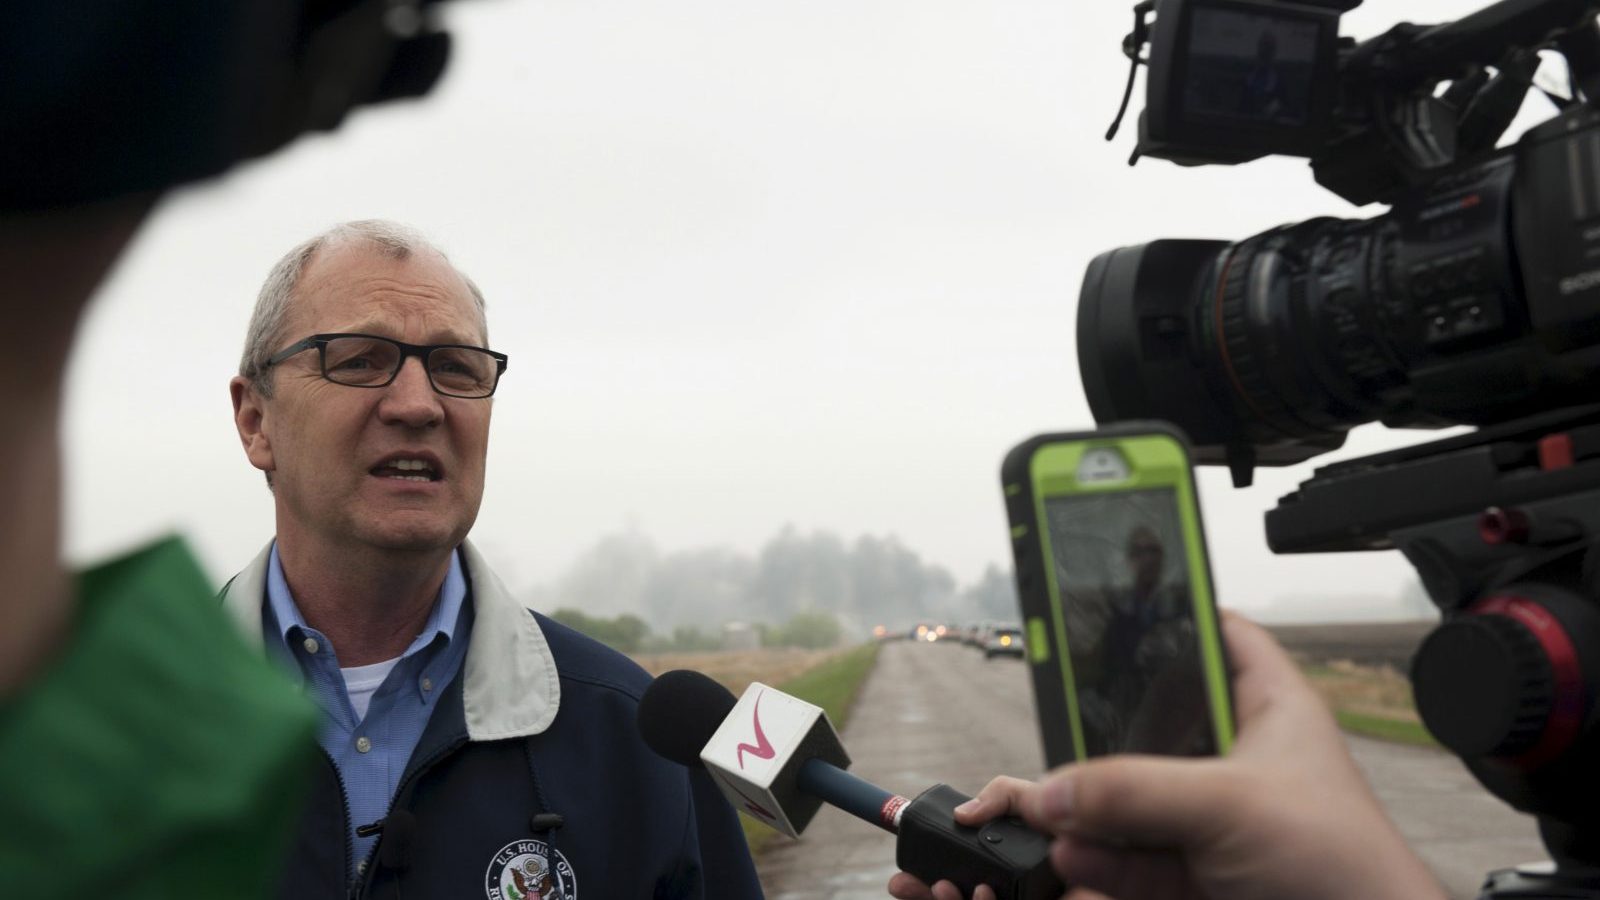 U.S. Representative Kevin Cramer, (R-ND) speaks to the media while smoke from the wreckage of several oil tanker cars that derailed in a field near the town of Heimdal, North Dakota billows behind him May 6, 2015. A train carrying crude oil derailed and caught fire on Wednesday, officials said, just days after the U.S. government announced sweeping reforms to improve safety of the volatile shipments.